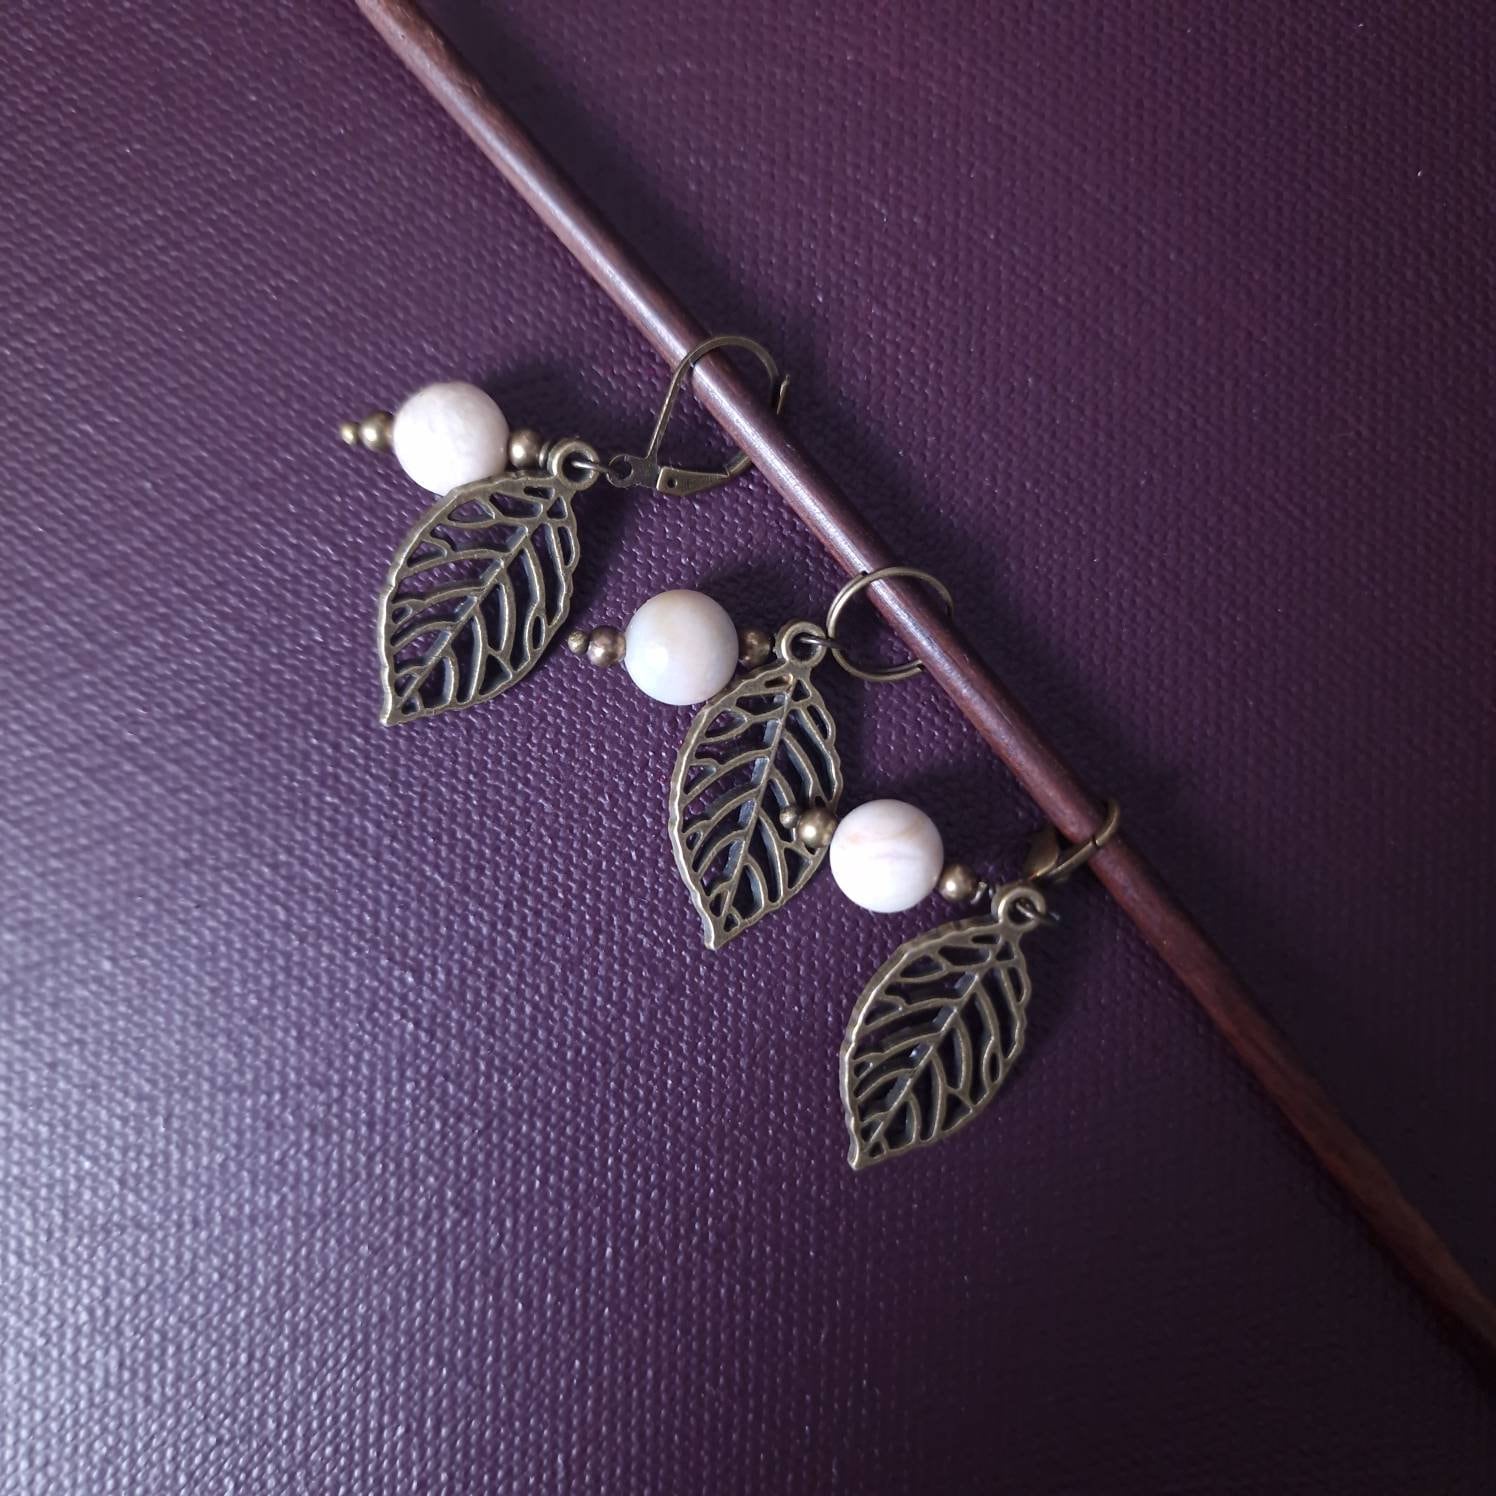 Stitch marker ~Leaf on the moon~ Knitting notions, progress markers, progress keepers, crochet notions, gift for knitter